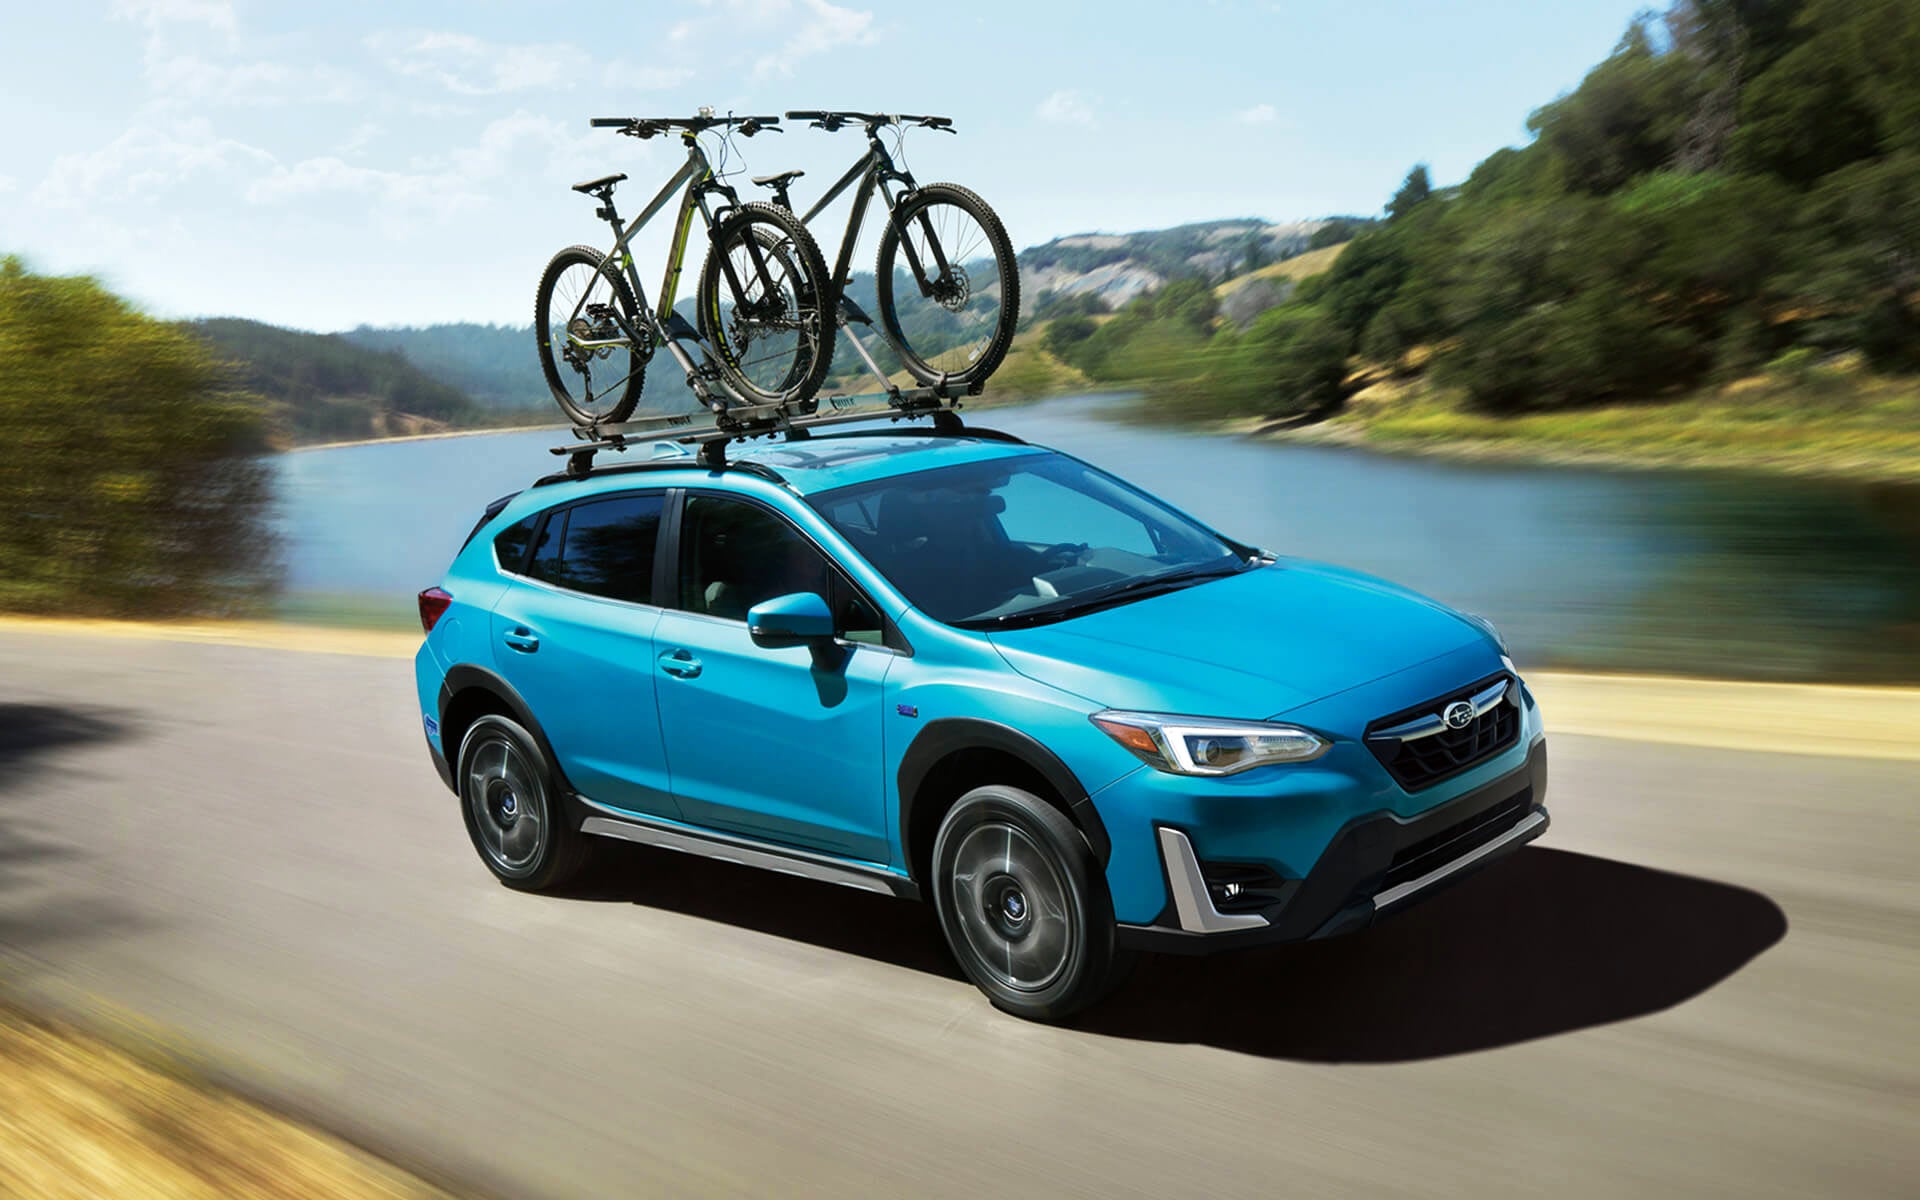 A blue Crosstrek Hybrid with two bicycles on its roof rack driving beside a river | Jim Keras Subaru in Memphis TN